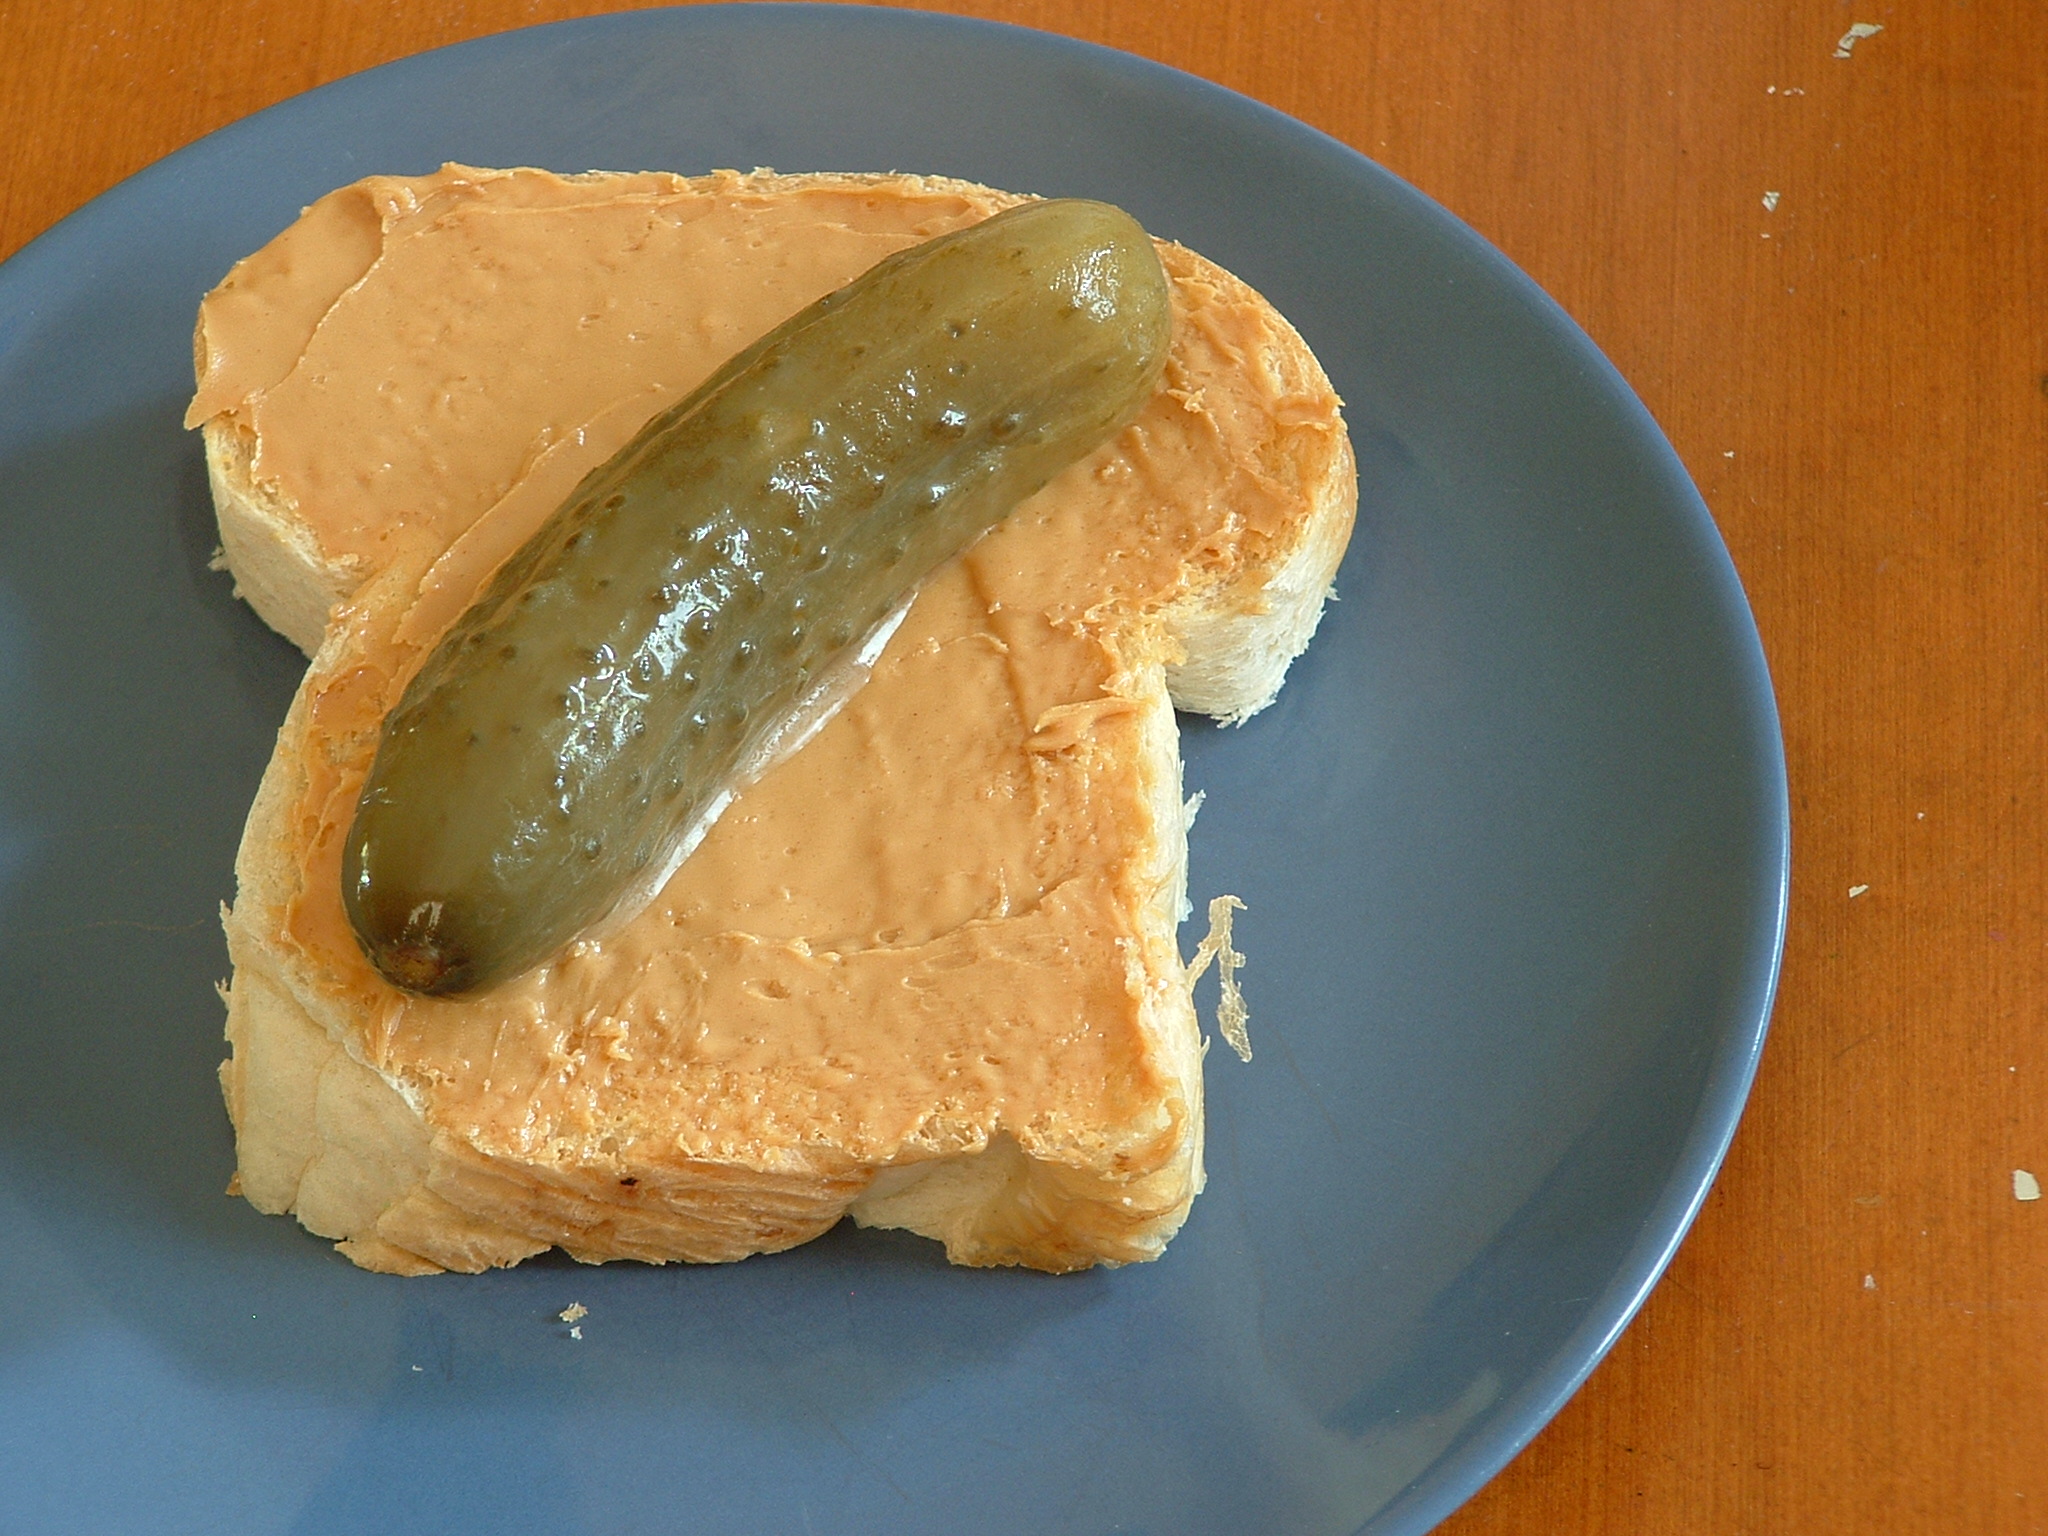 Peanut Butter and Pickles